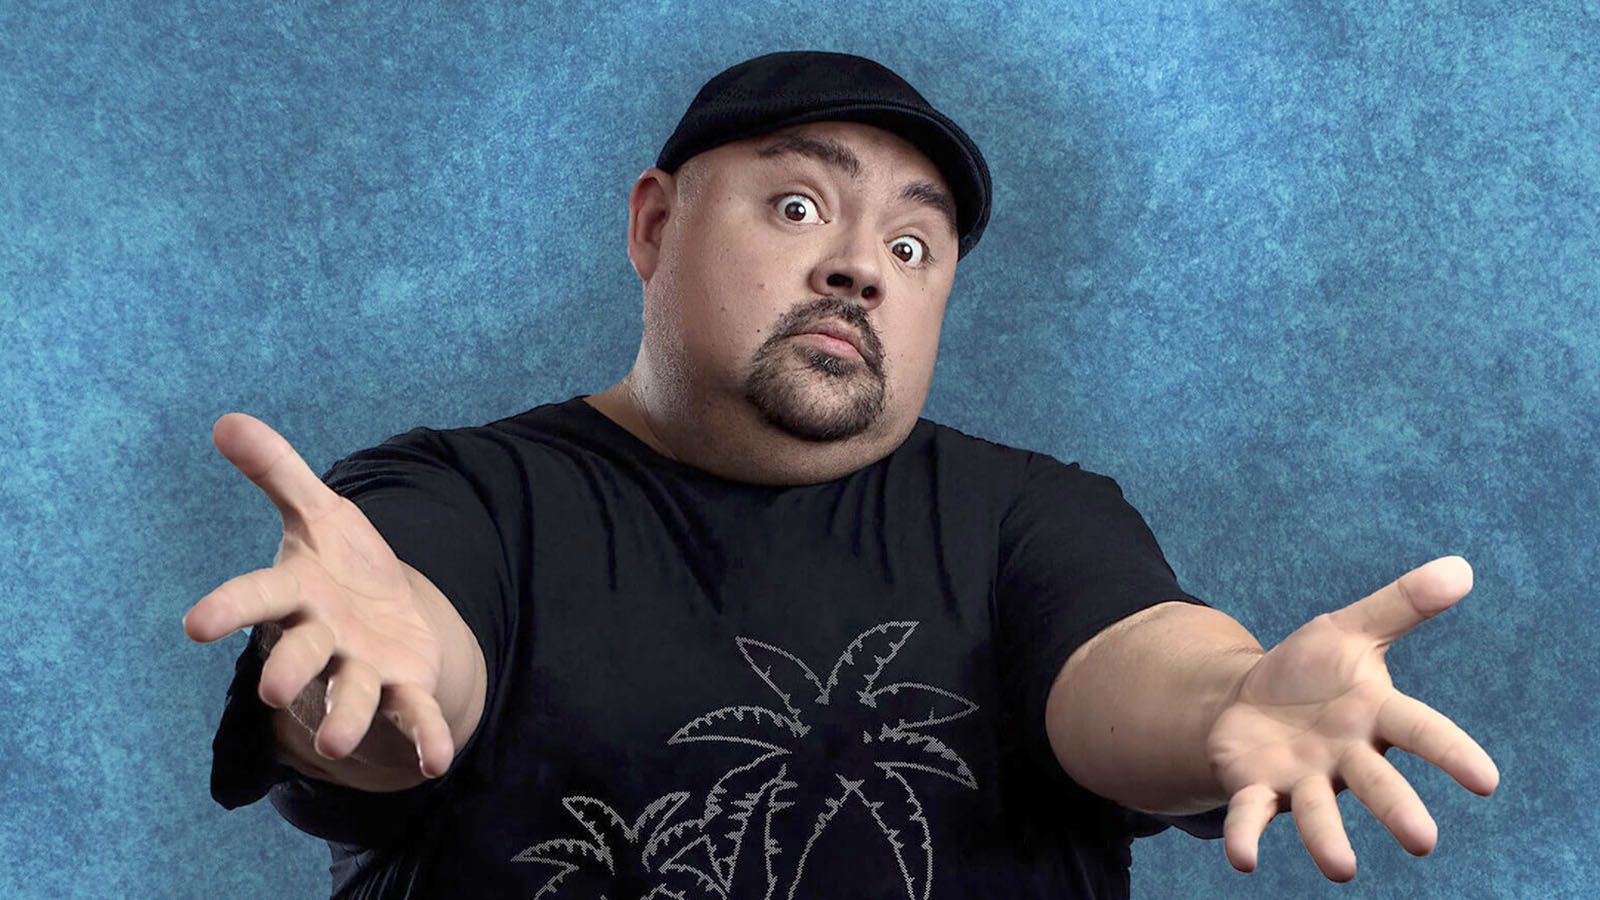 Gabriel "Fluffy" Iglesias will be at Memorial Coliseum on Oct. 13.